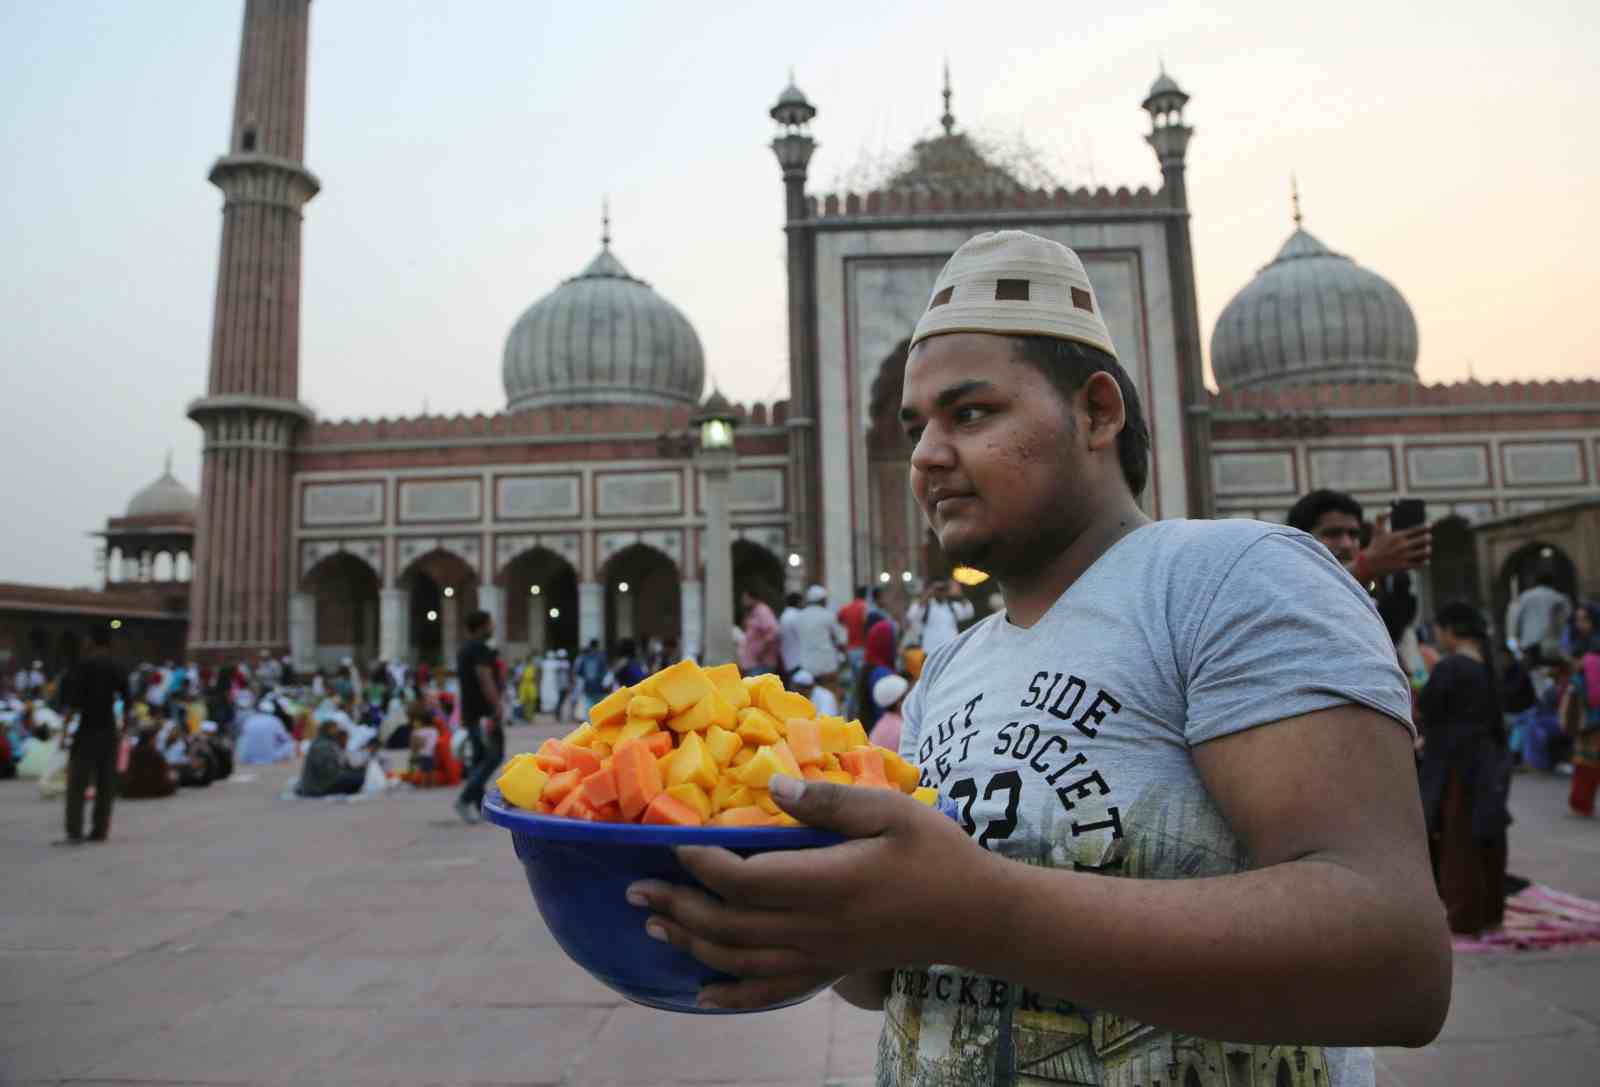 A man carries a fruit bowl to distribute among people at Jama Masjid in Delhi, India during Ramzan, May 18, 2018.(Xinhua/Javed Dar via Getty Images)
